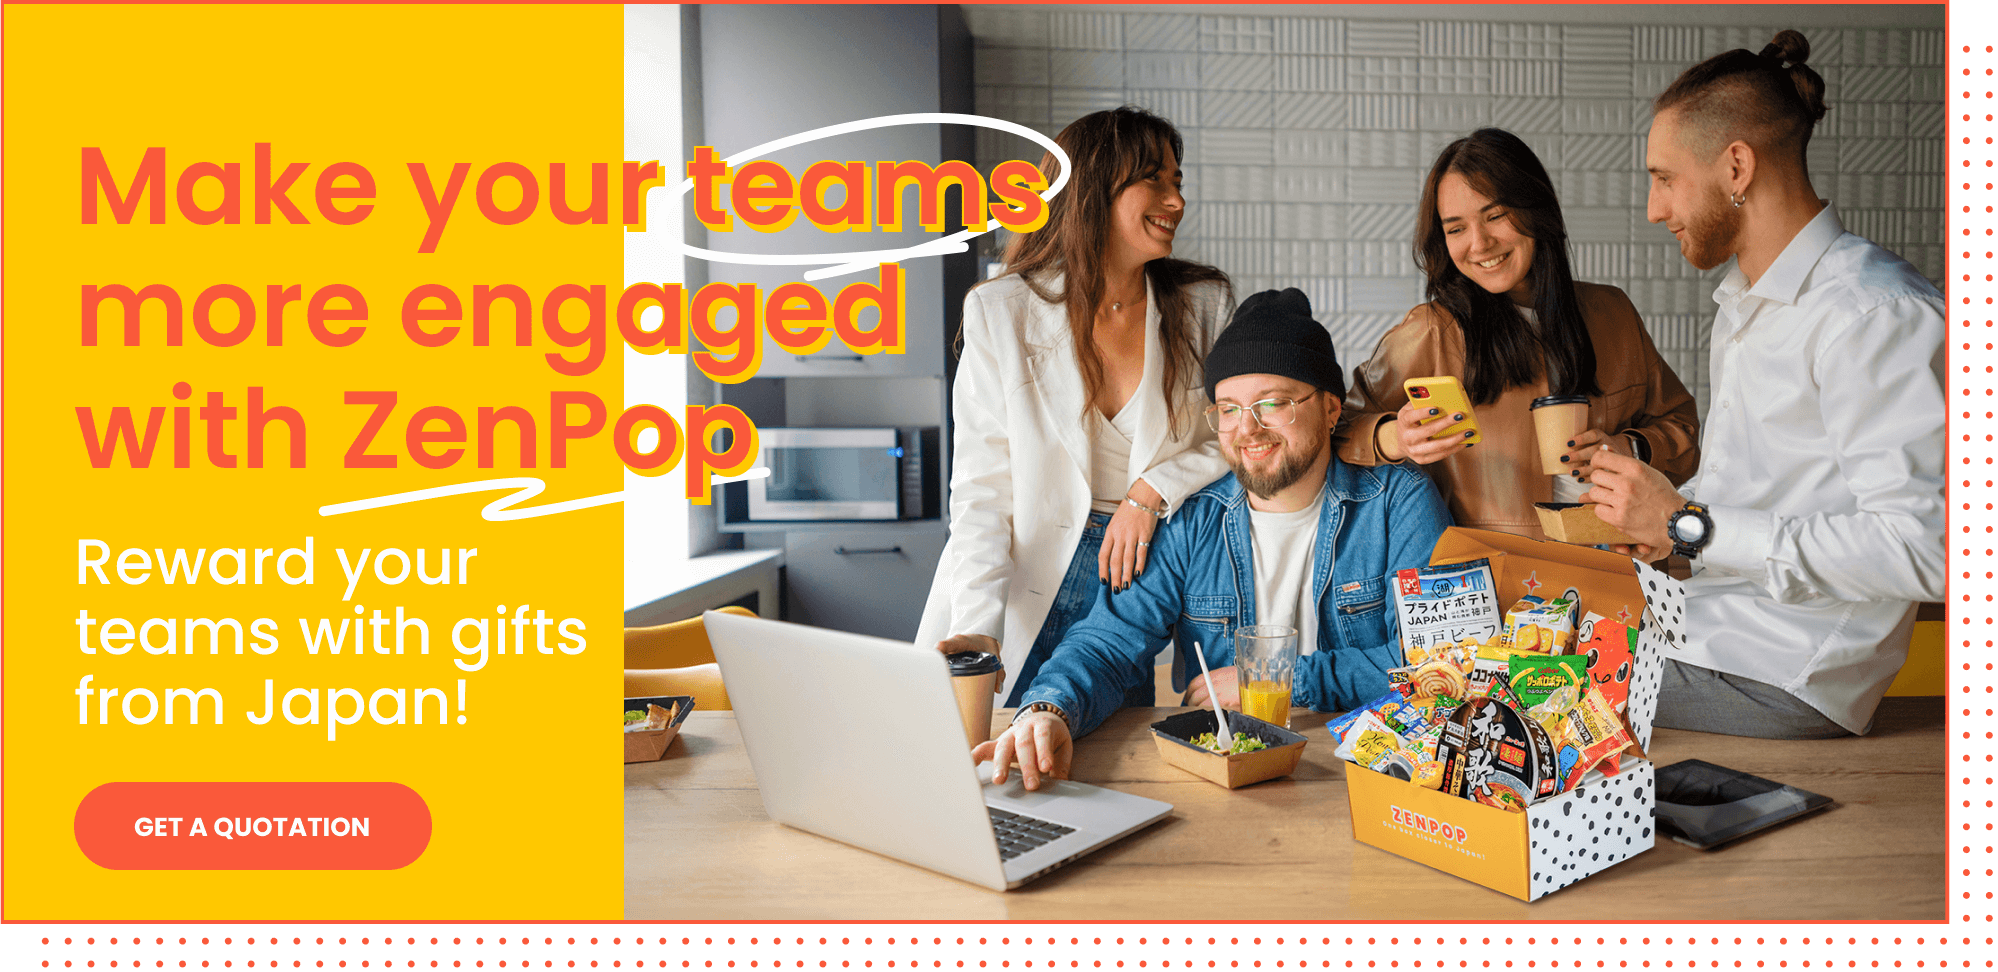 Make your team more engaged with zenpop